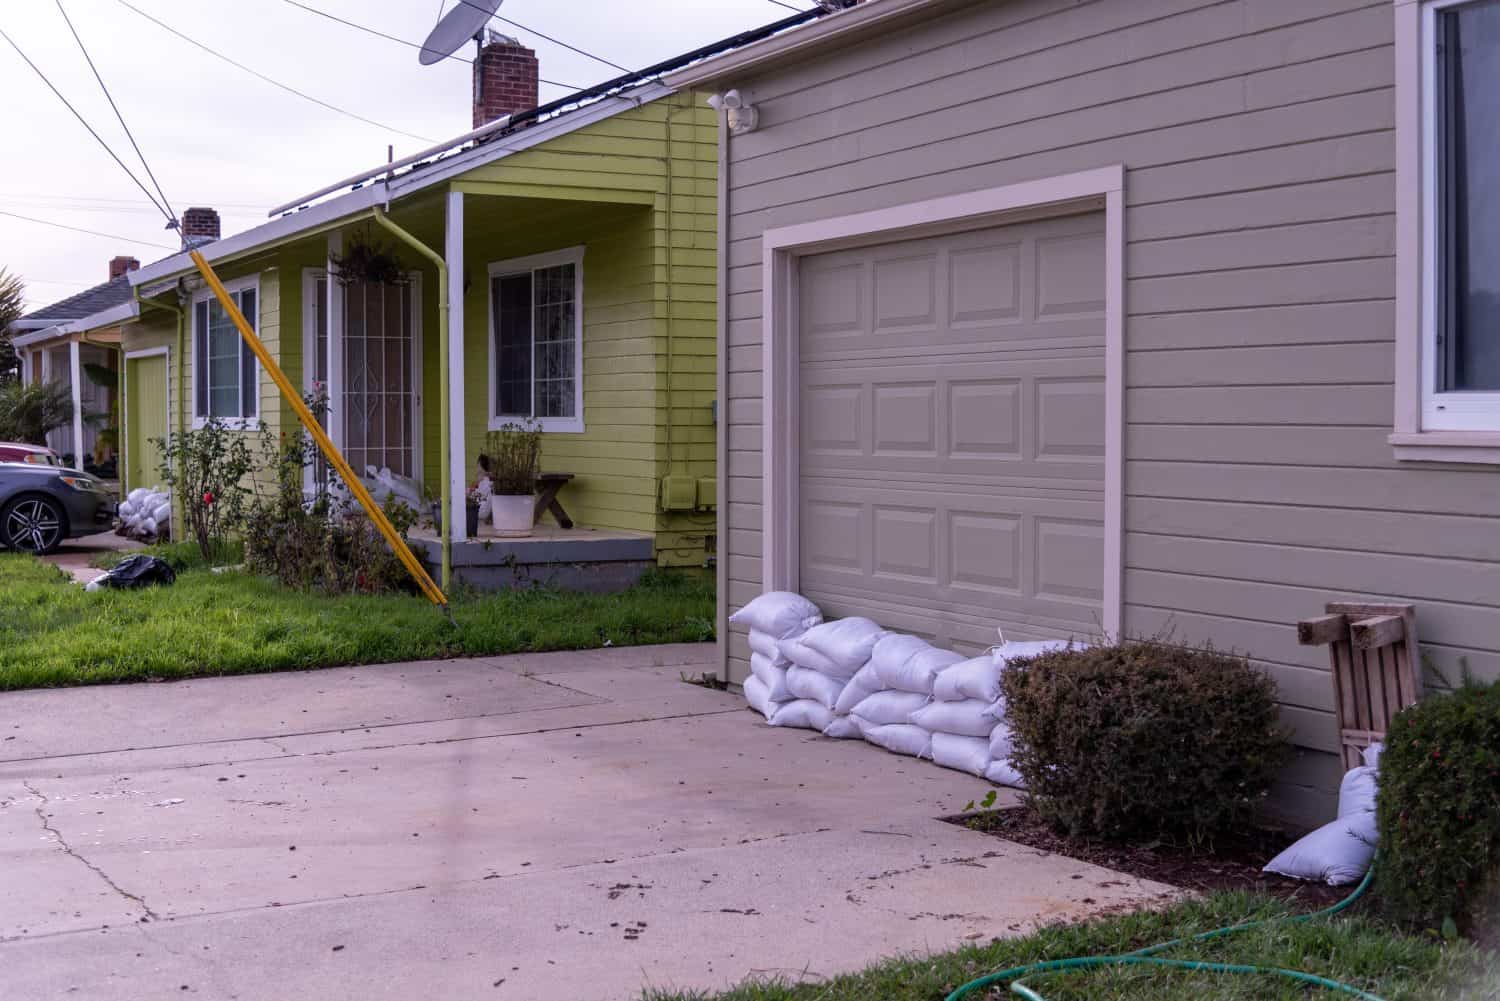 Santa Cruz County, Watsonville, CA, USA on January 12, 2023. Destruction, sandbags keep out water; flooding houses in the area between the Passaro River and the Sausipuedes River, storm